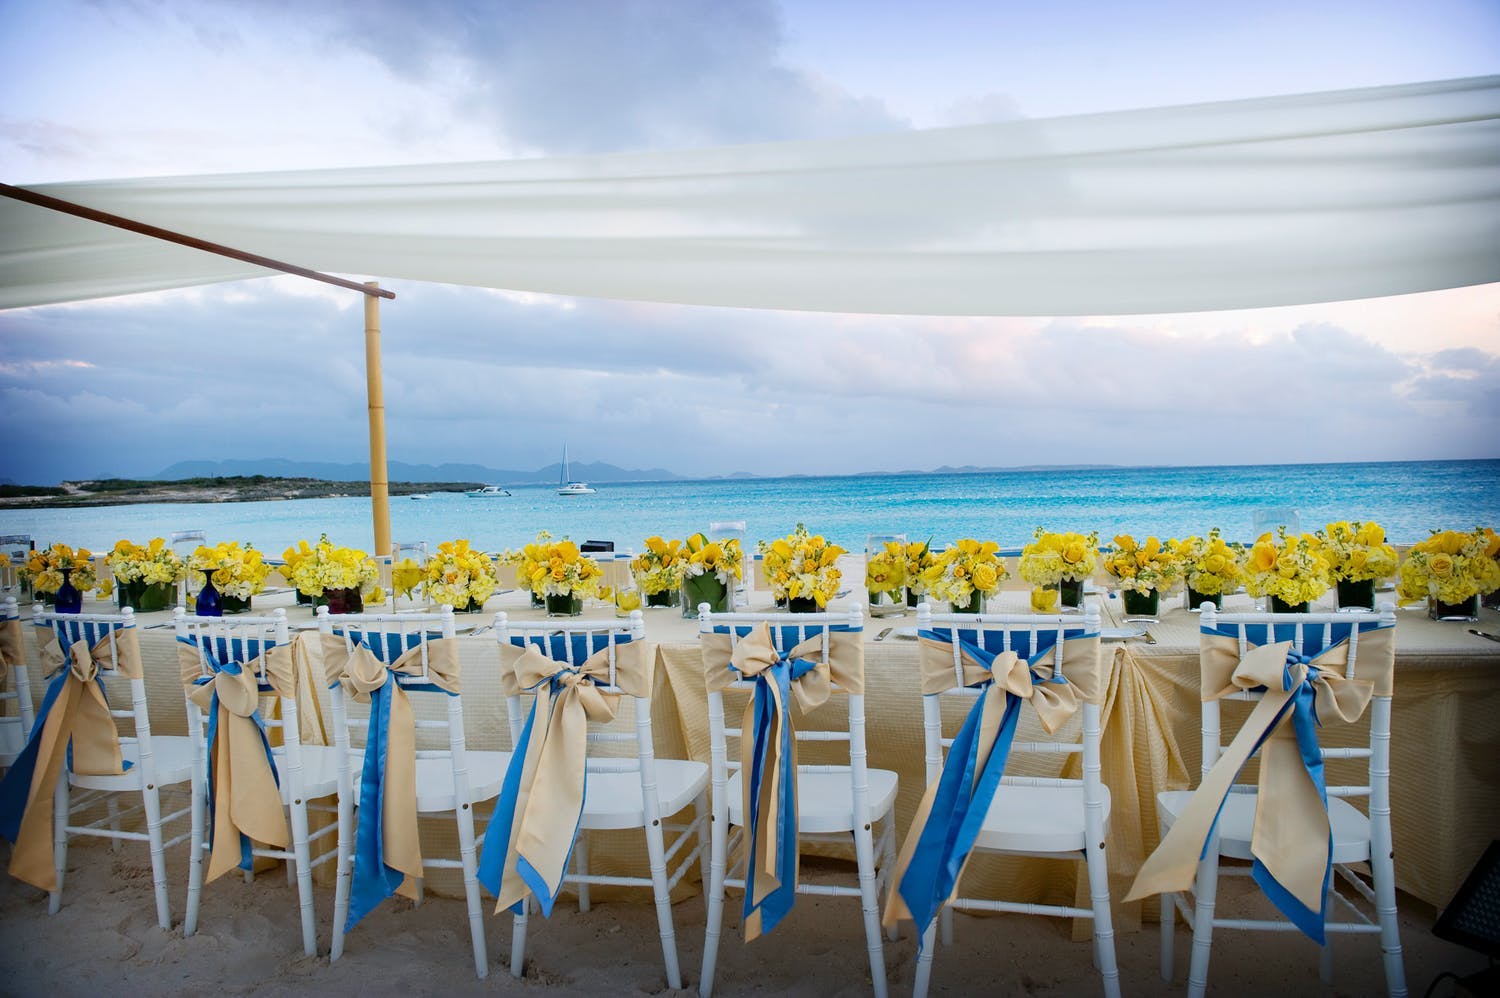 Seaside Wedding Tablescape With Bright and Cheerful Yellow Blooms | PartySlate